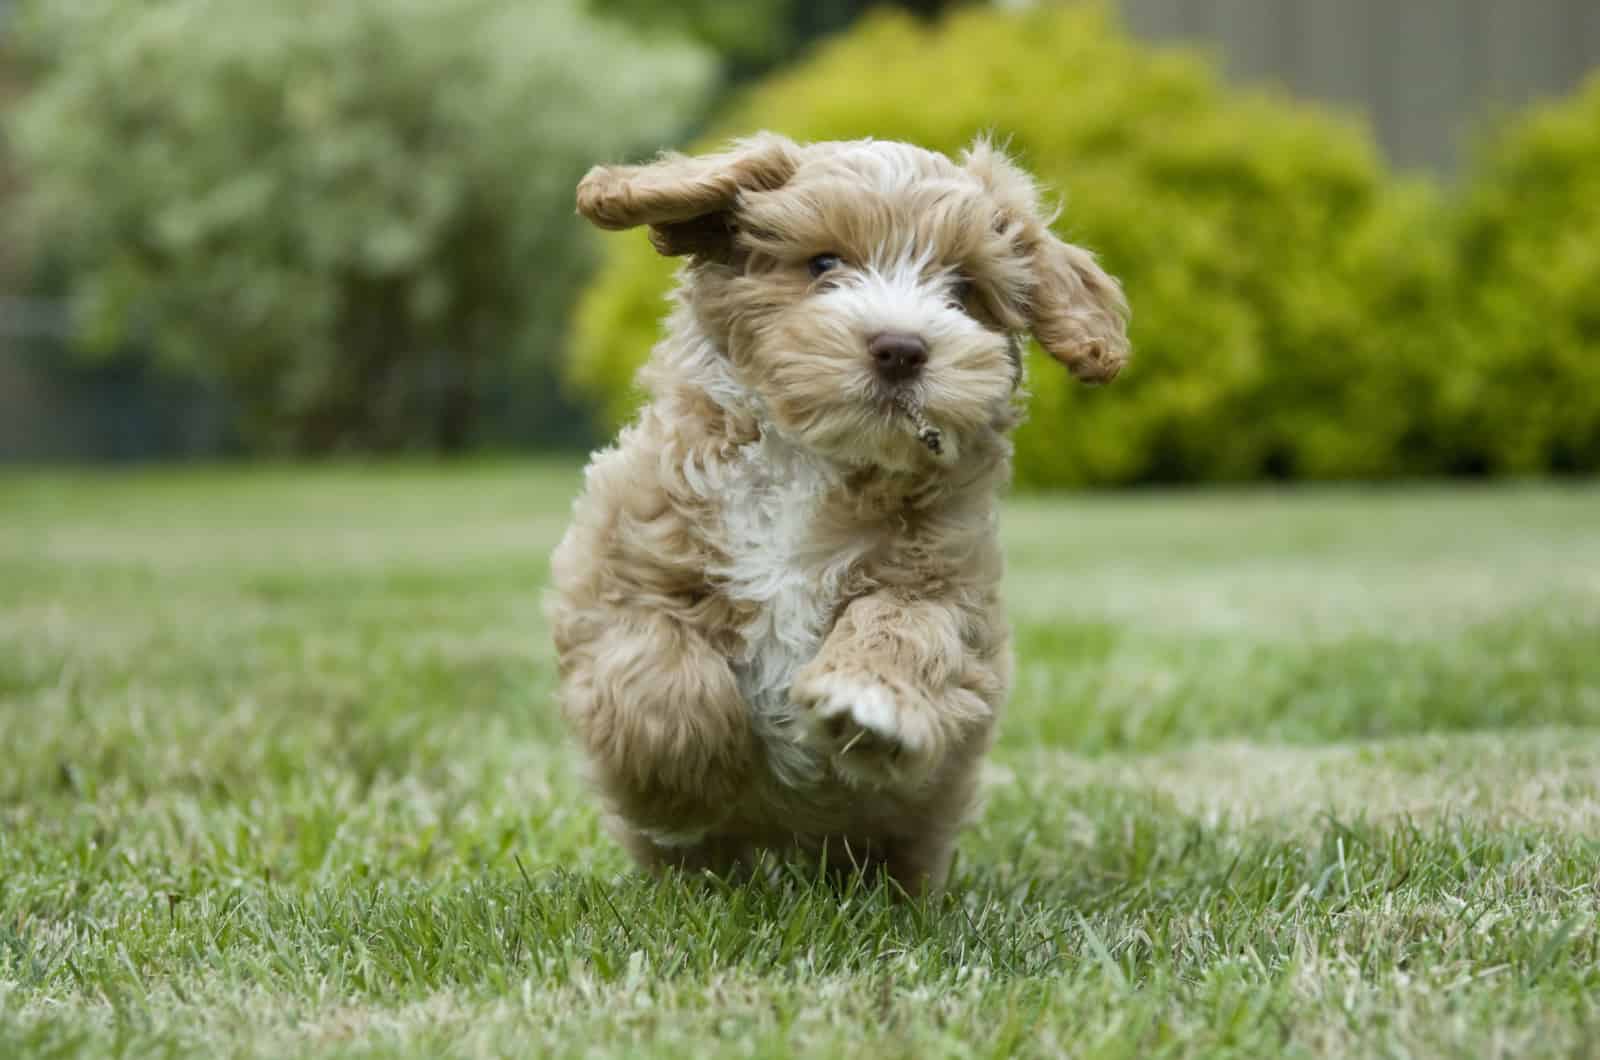 Champagne Cockapoo running on grass